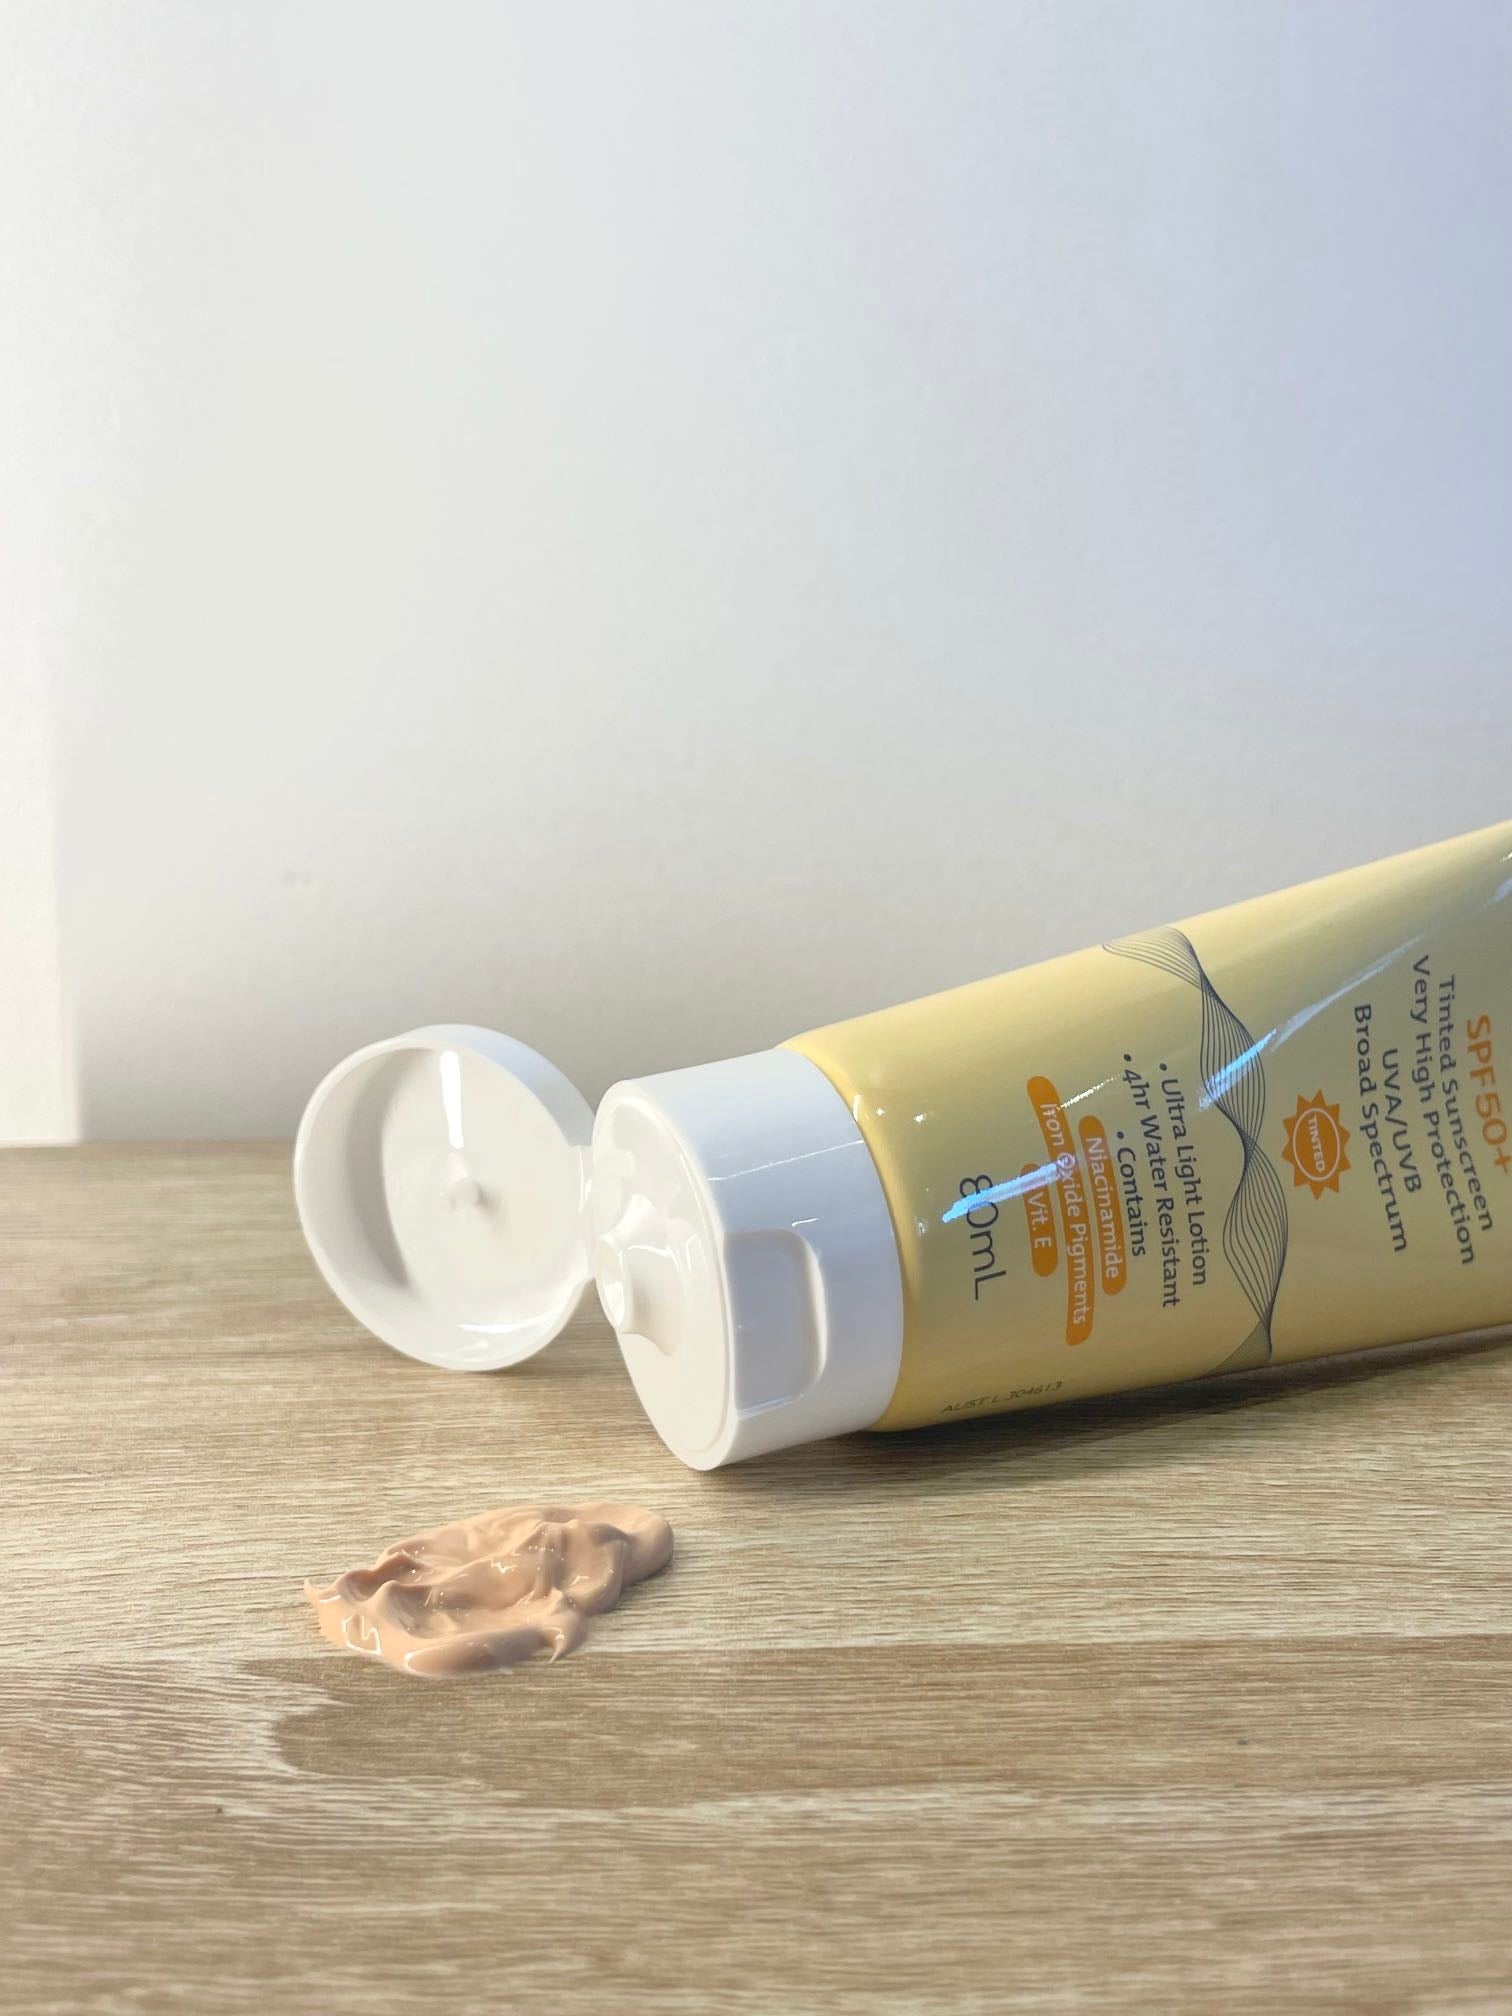 Propaira SPF50+ Tinted Sunscreen in Light Tone - 80ml | water resistant sunscreen | skintoheart